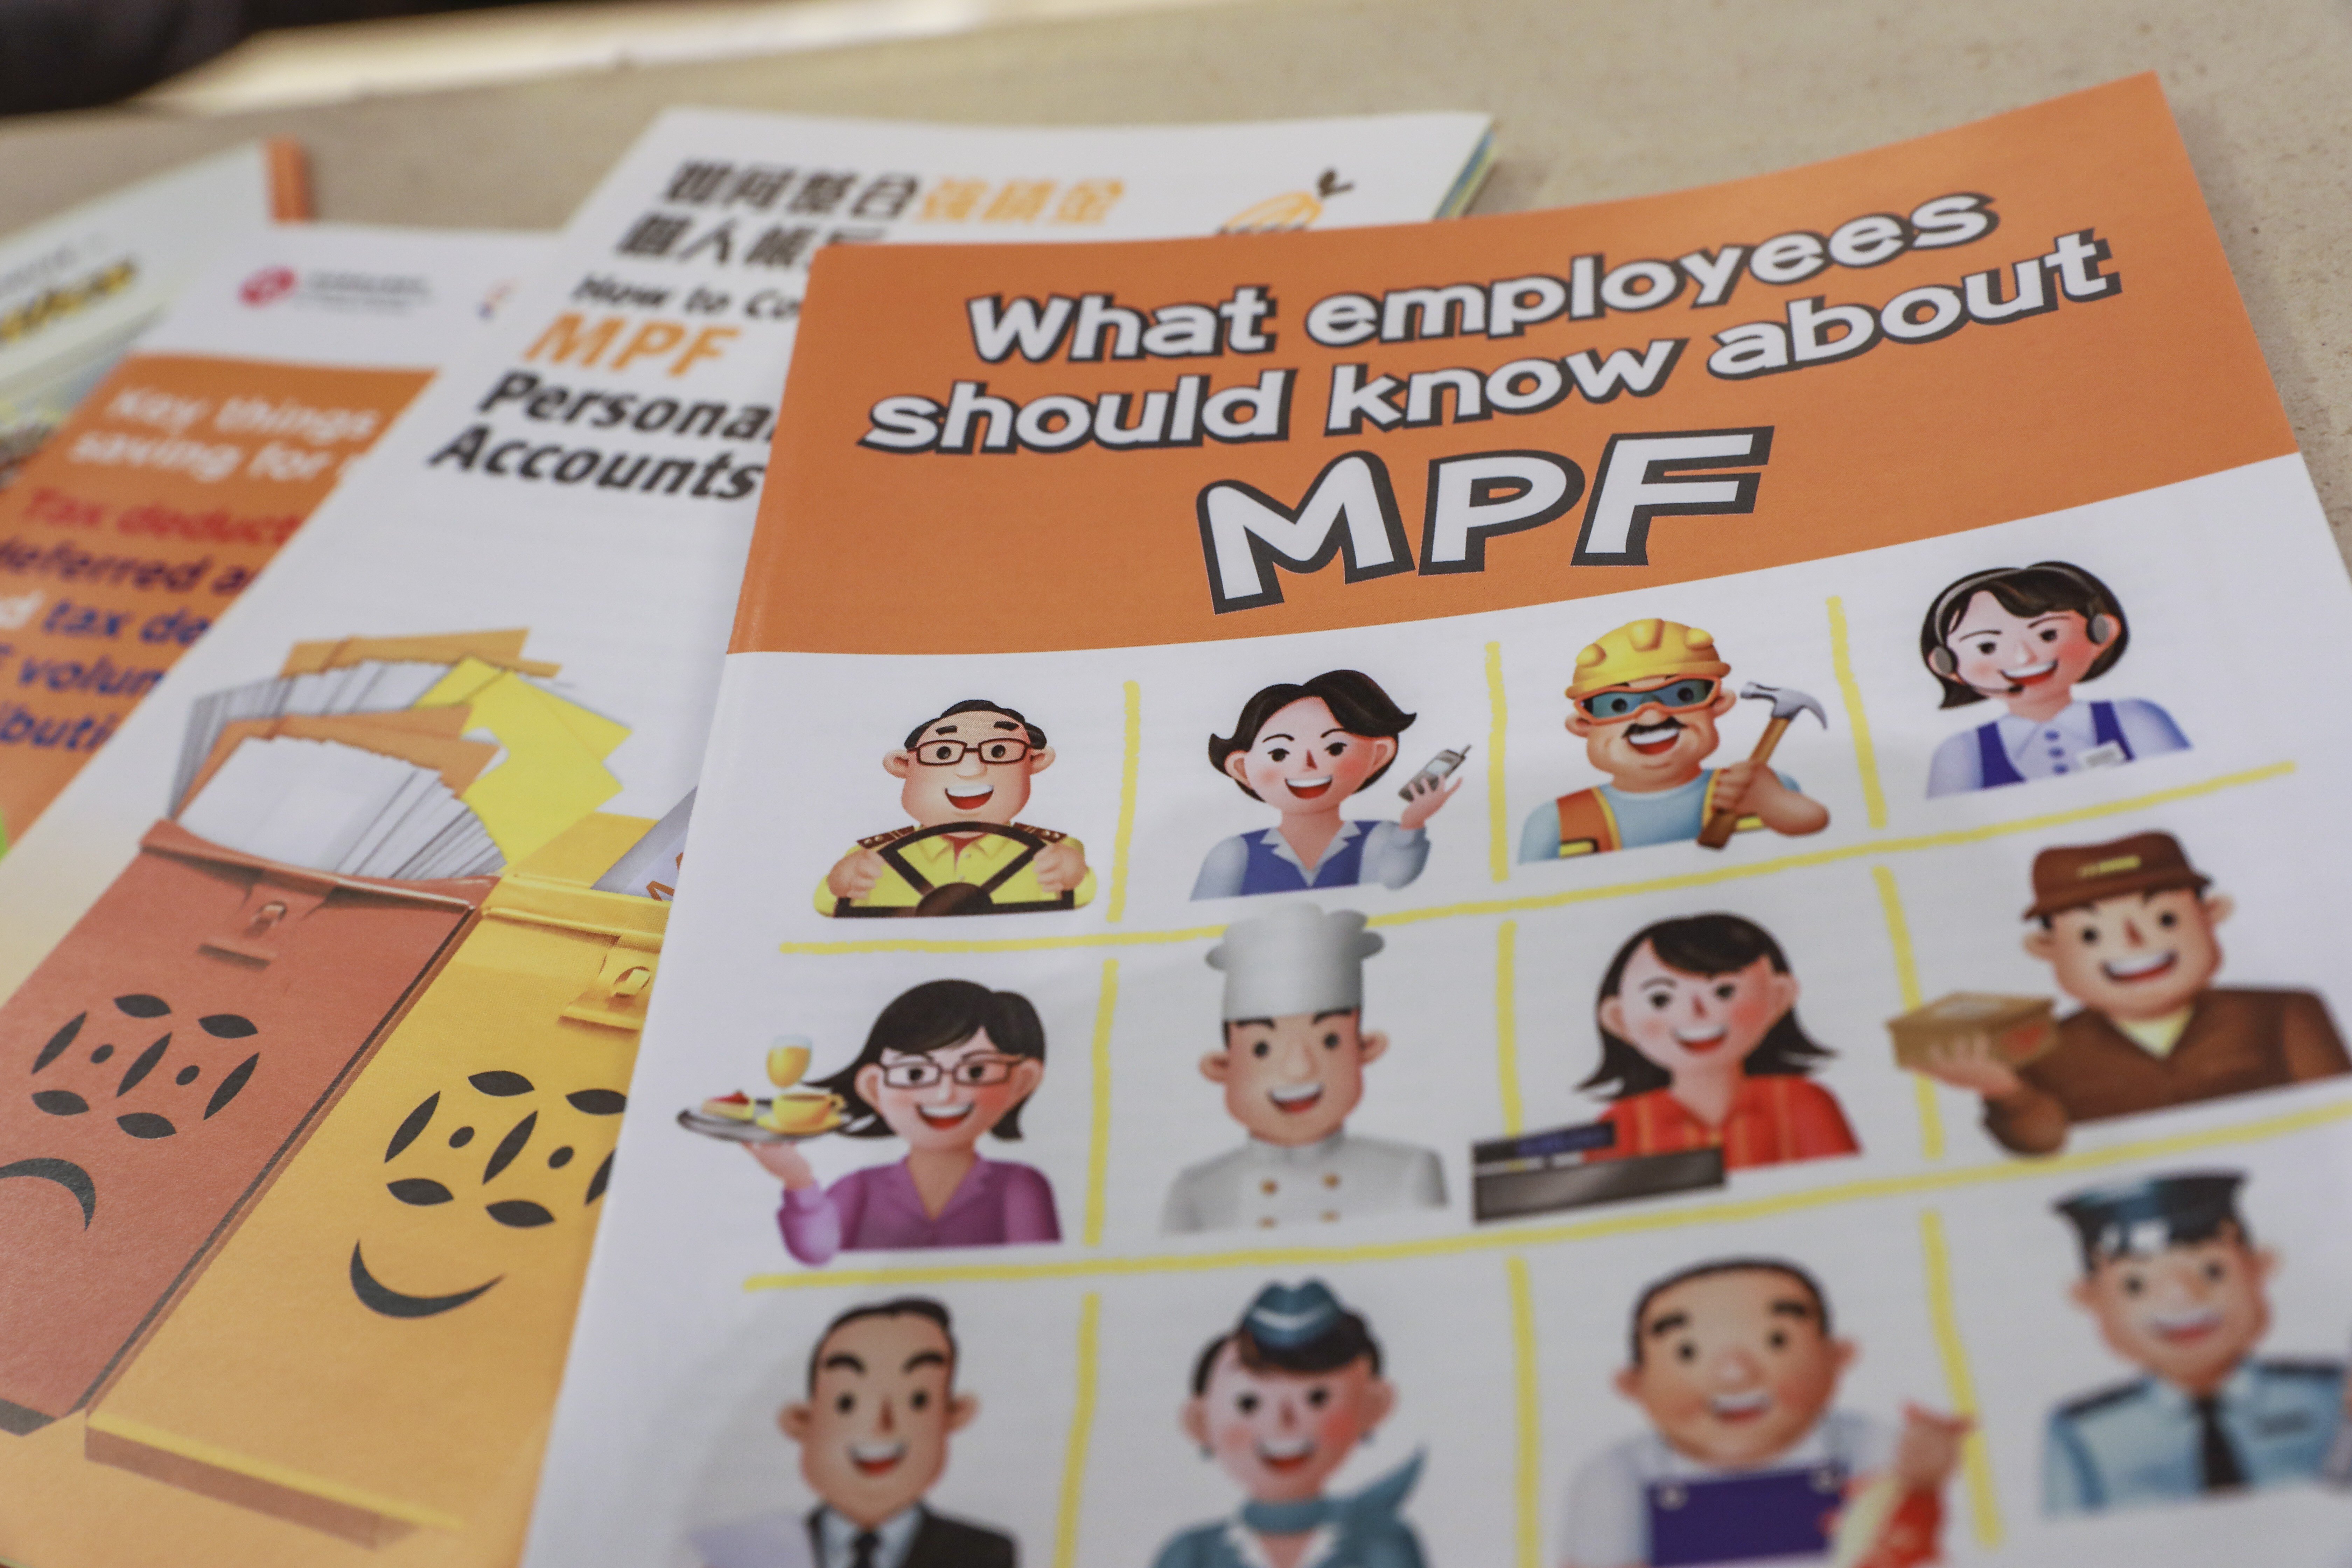 Leaflets on the Mandatory Provident Fund scheme, which requires both employers and employees to make monthly contributions as part of their salary structure. Photo: May Tse